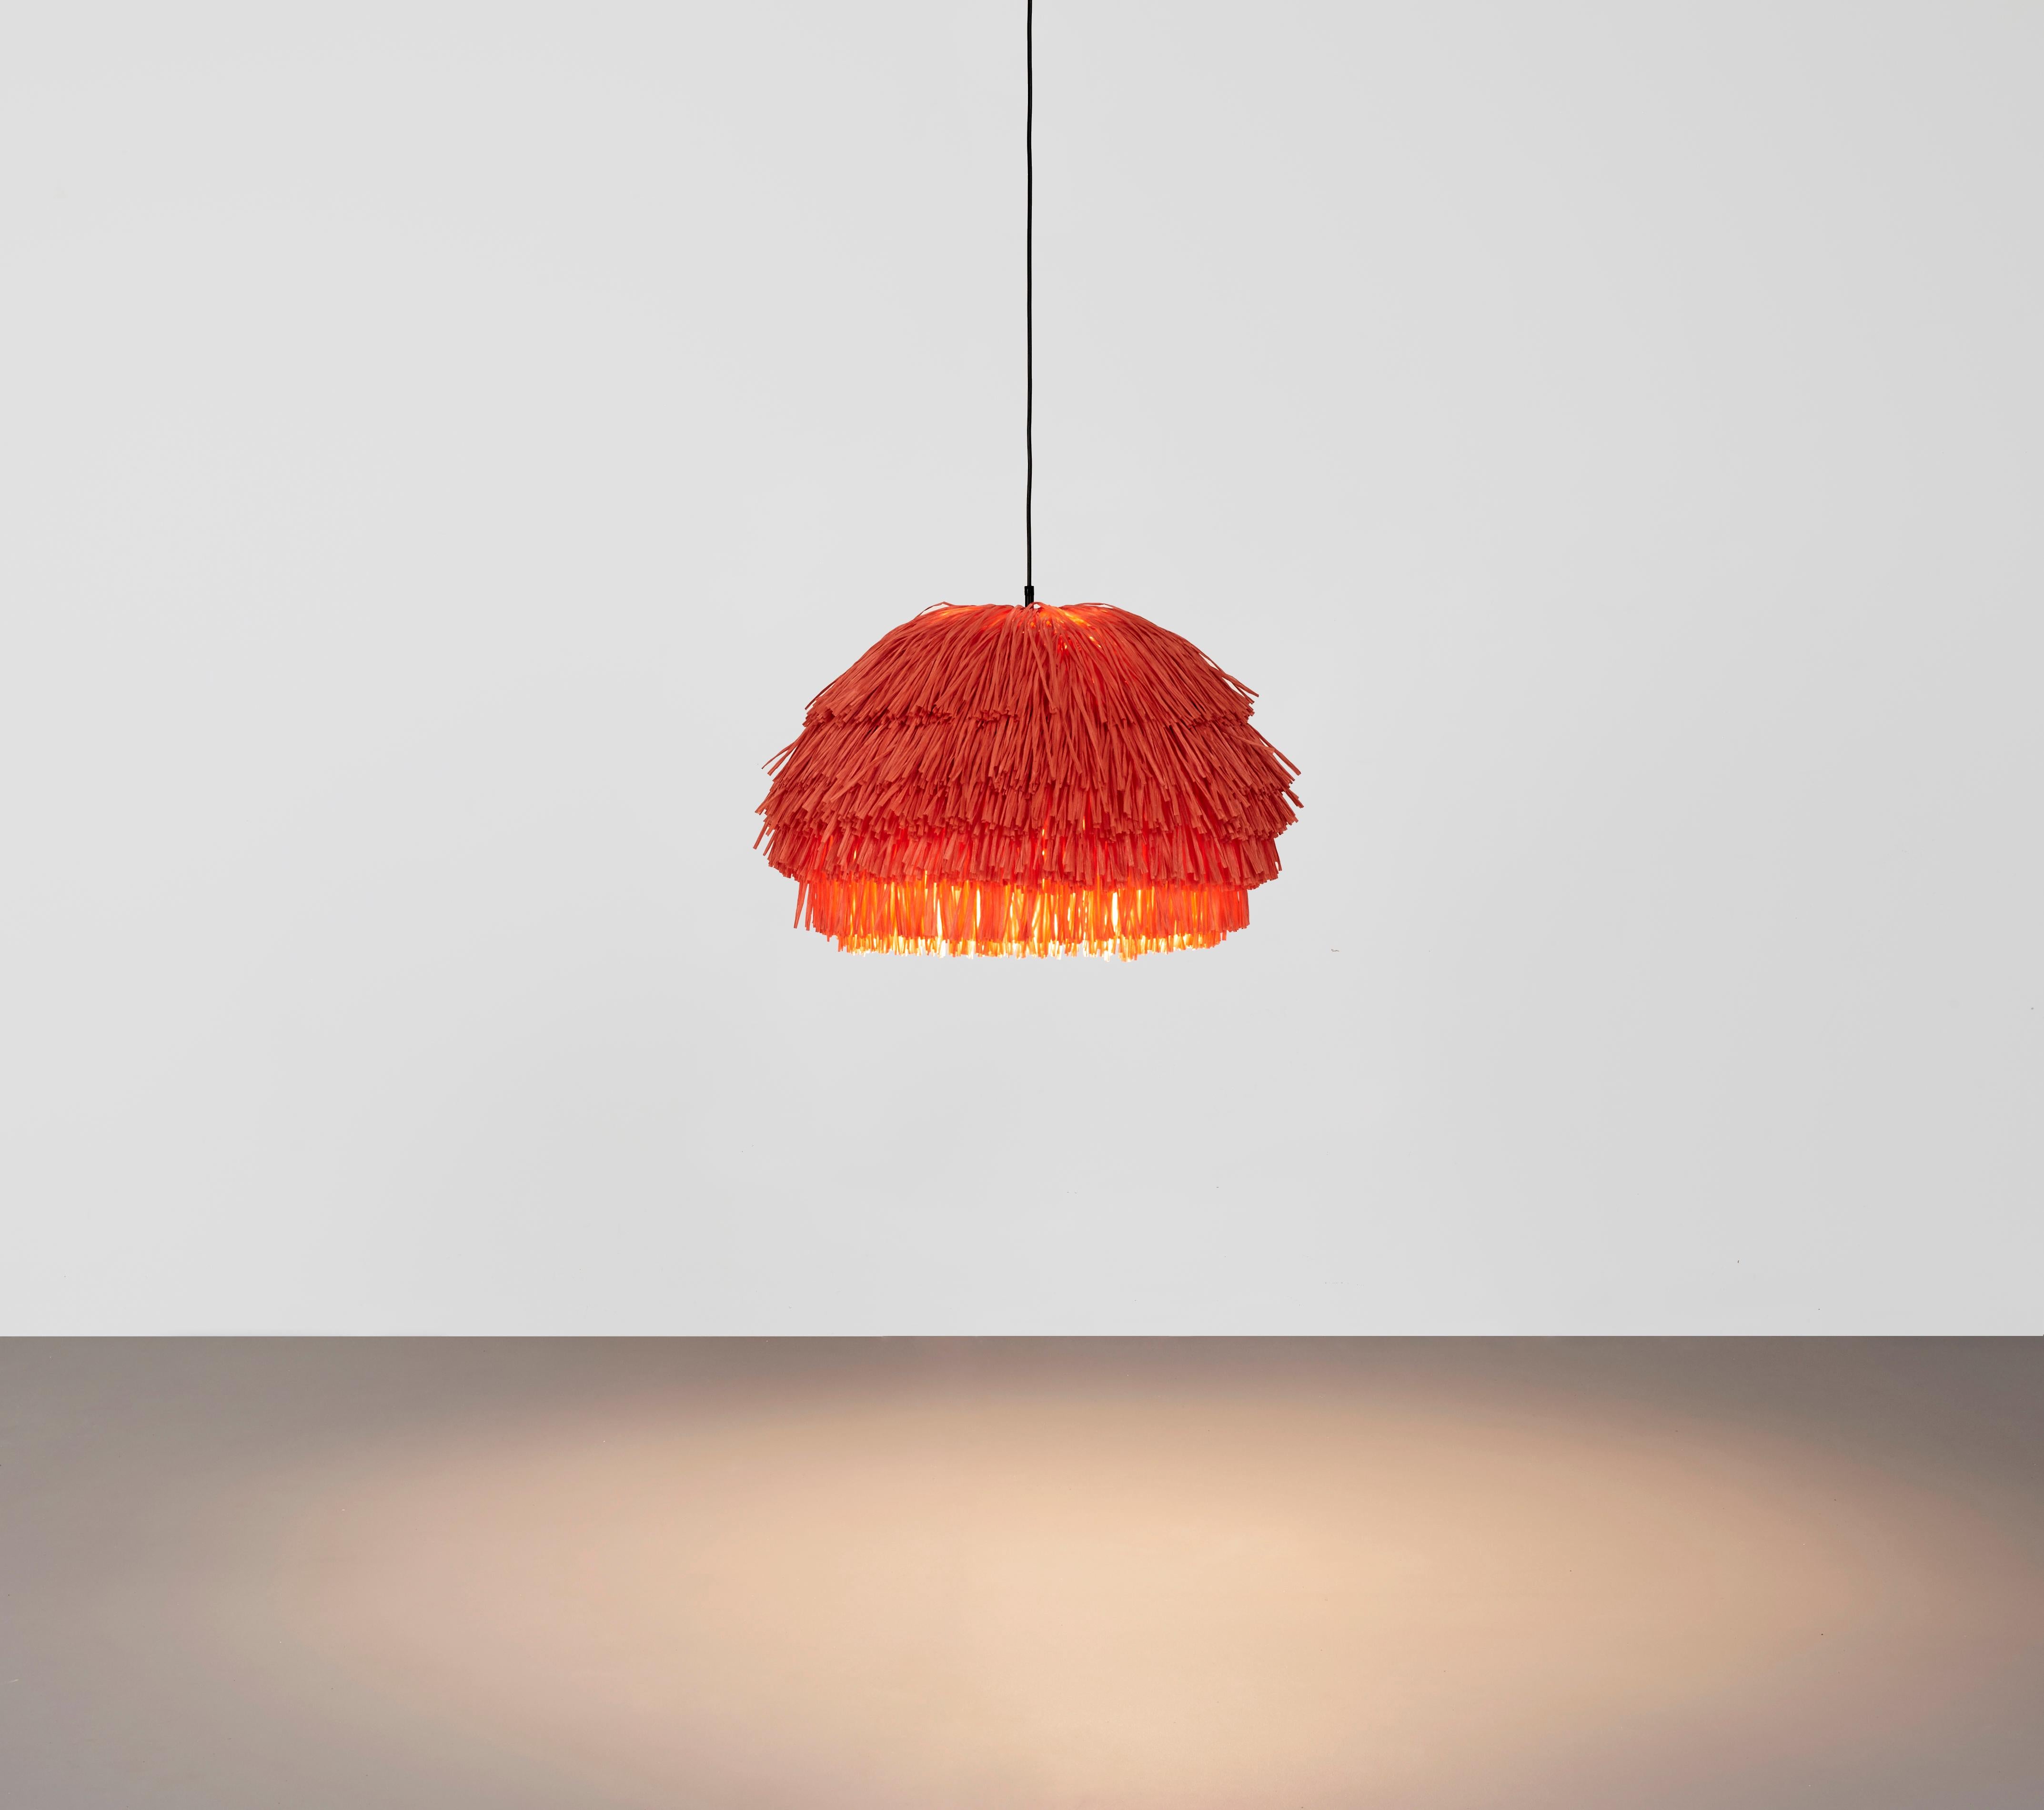 Beige Fran CS lamp by Llot Llov
Handcrafted Light Object
Dimensions: Ø 65 cm x H: 50 cm
Materials: raffia fringes
Colour: beige
Also available in green, red, black. 

The latest addition to the FRAN family is the FRAN TOWER. The eye-catching